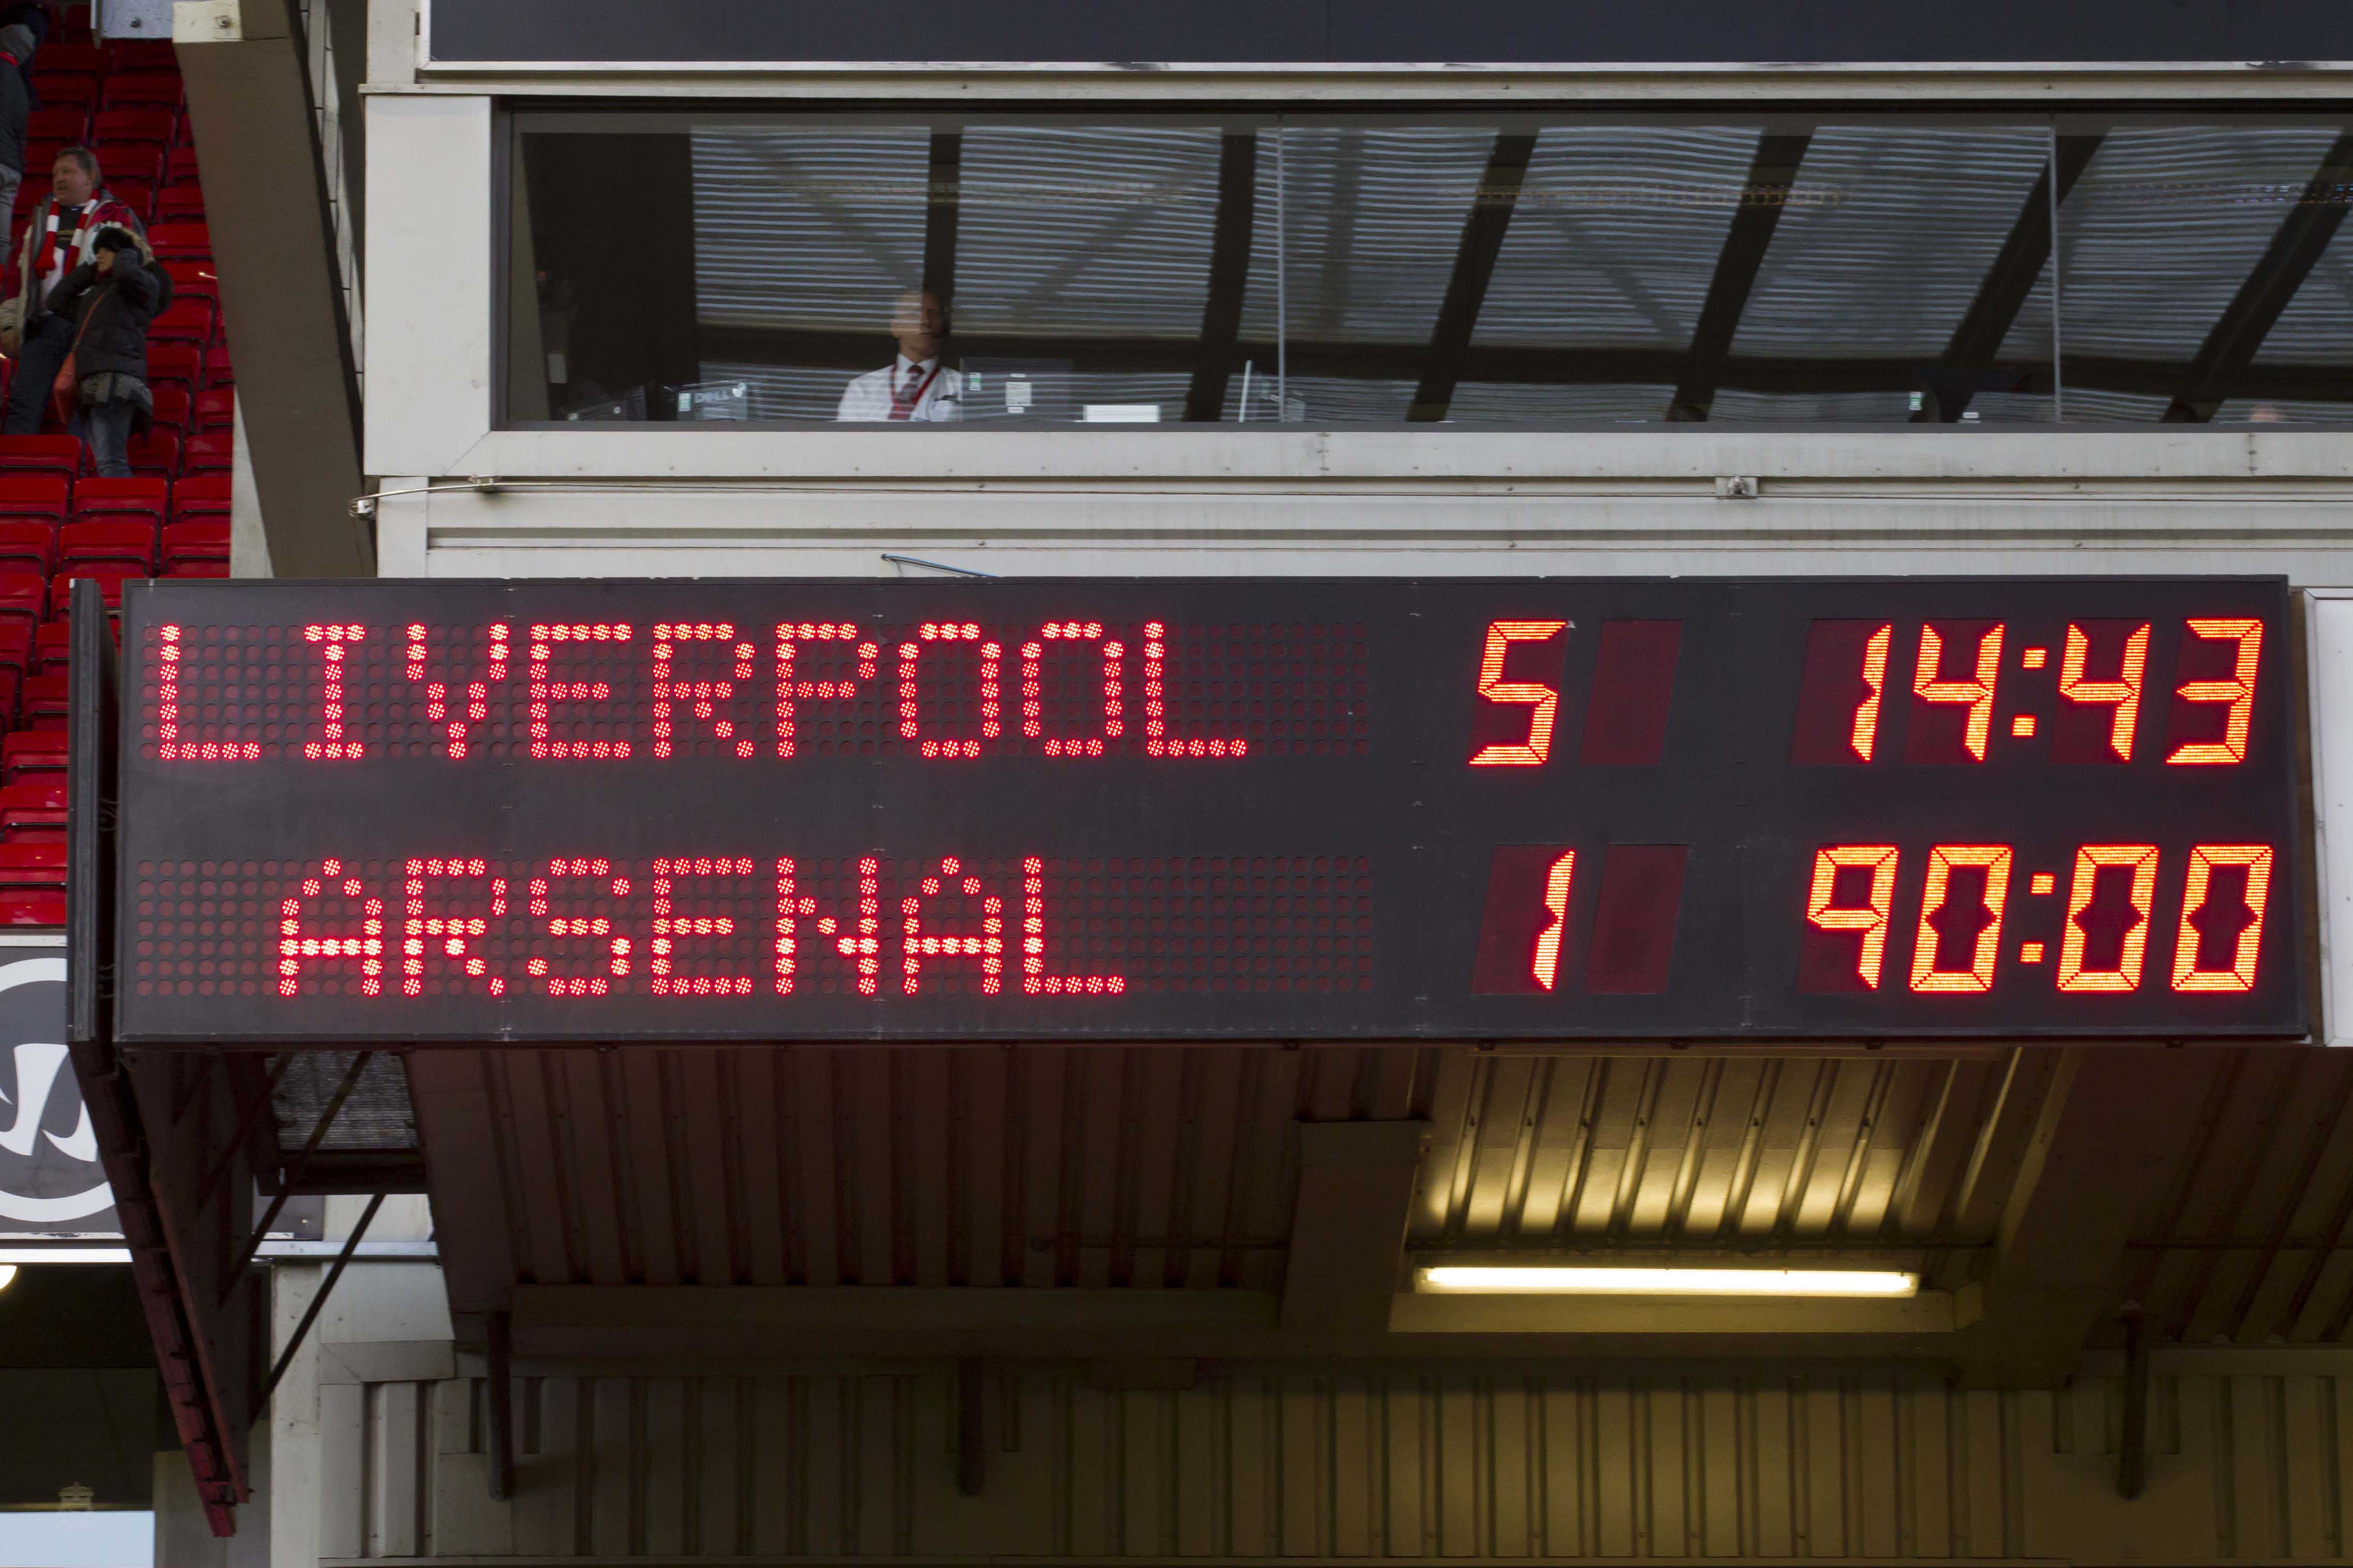 LIVERPOOL 5 (FIVE) ARSENAL 1: A (HALF) DAY IN THE LIFE